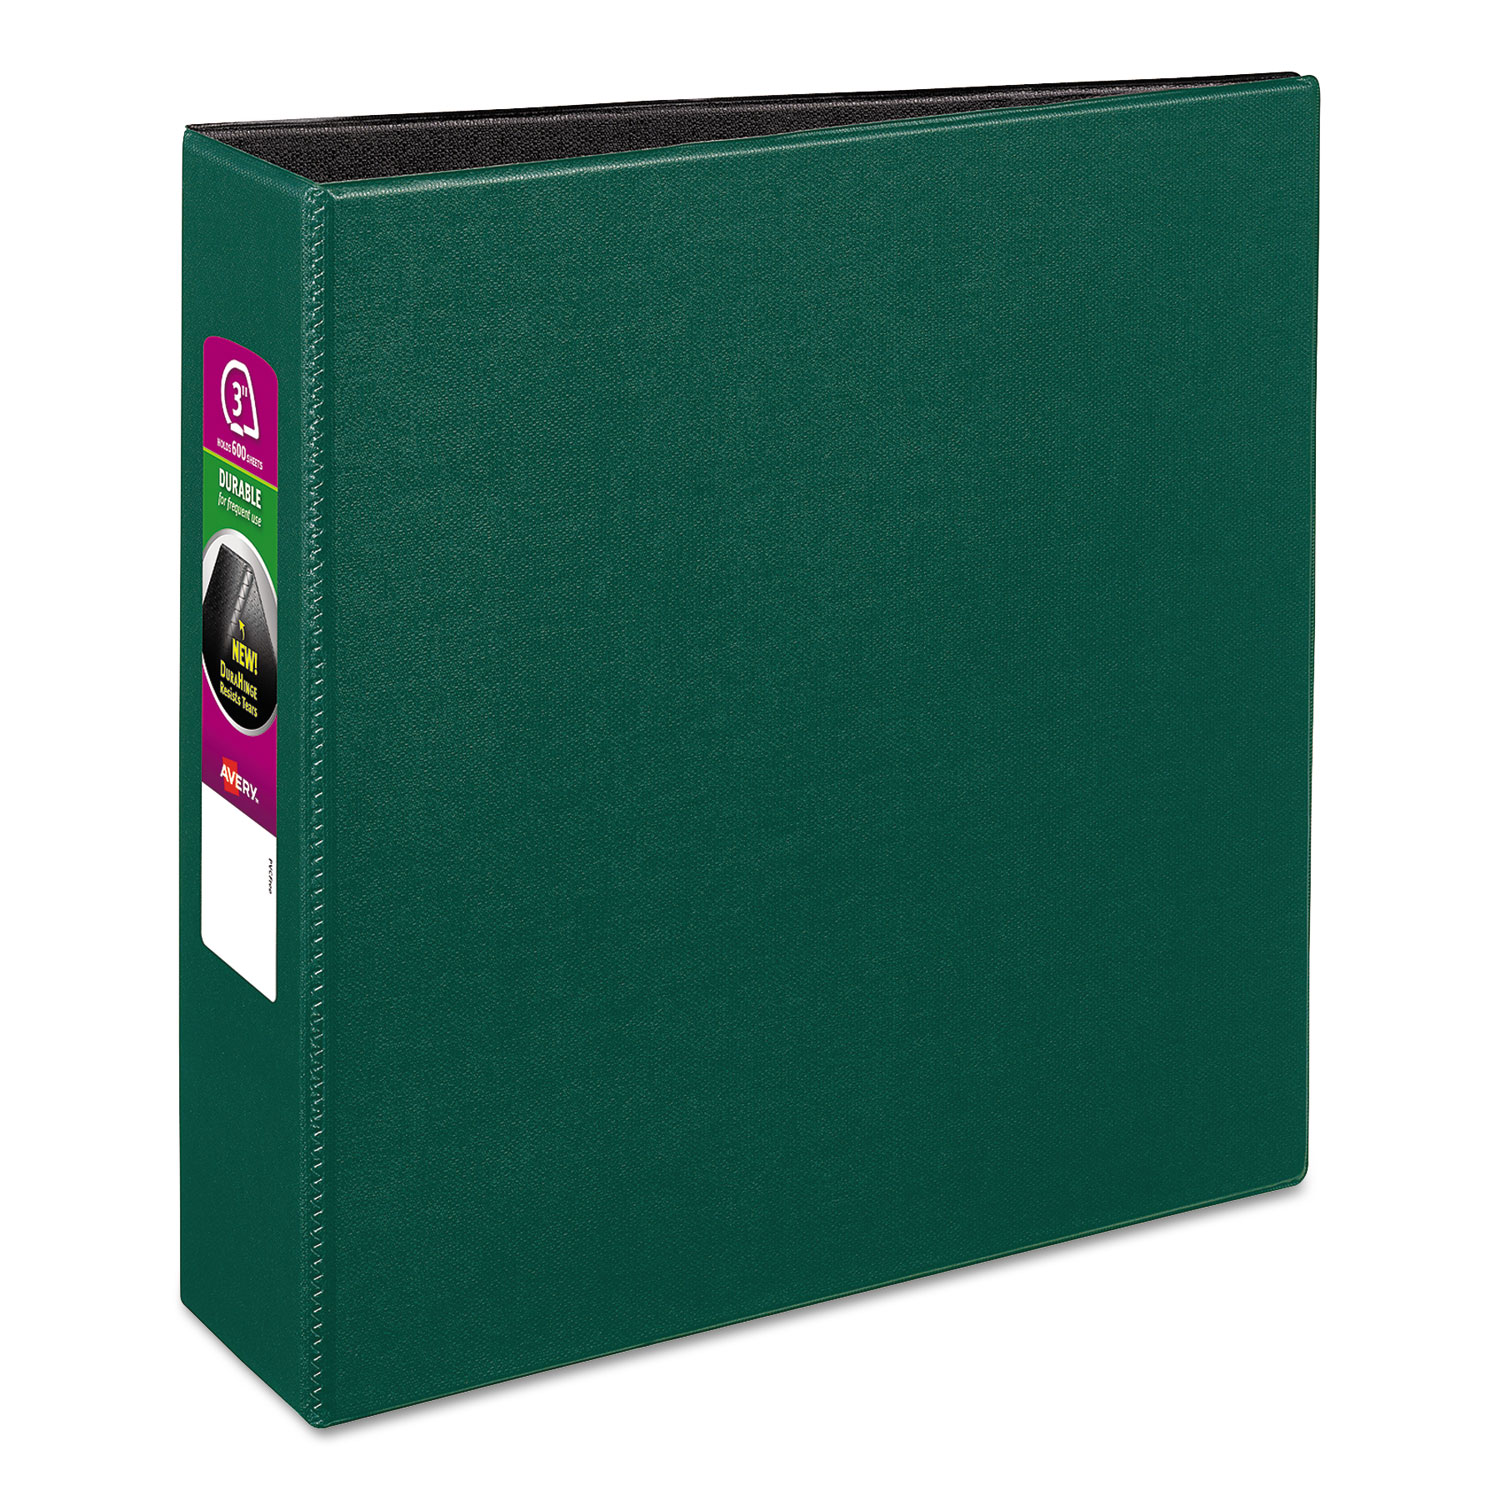  Avery 27653 Durable Non-View Binder with DuraHinge and Slant Rings, 3 Rings, 3 Capacity, 11 x 8.5, Green (AVE27653) 